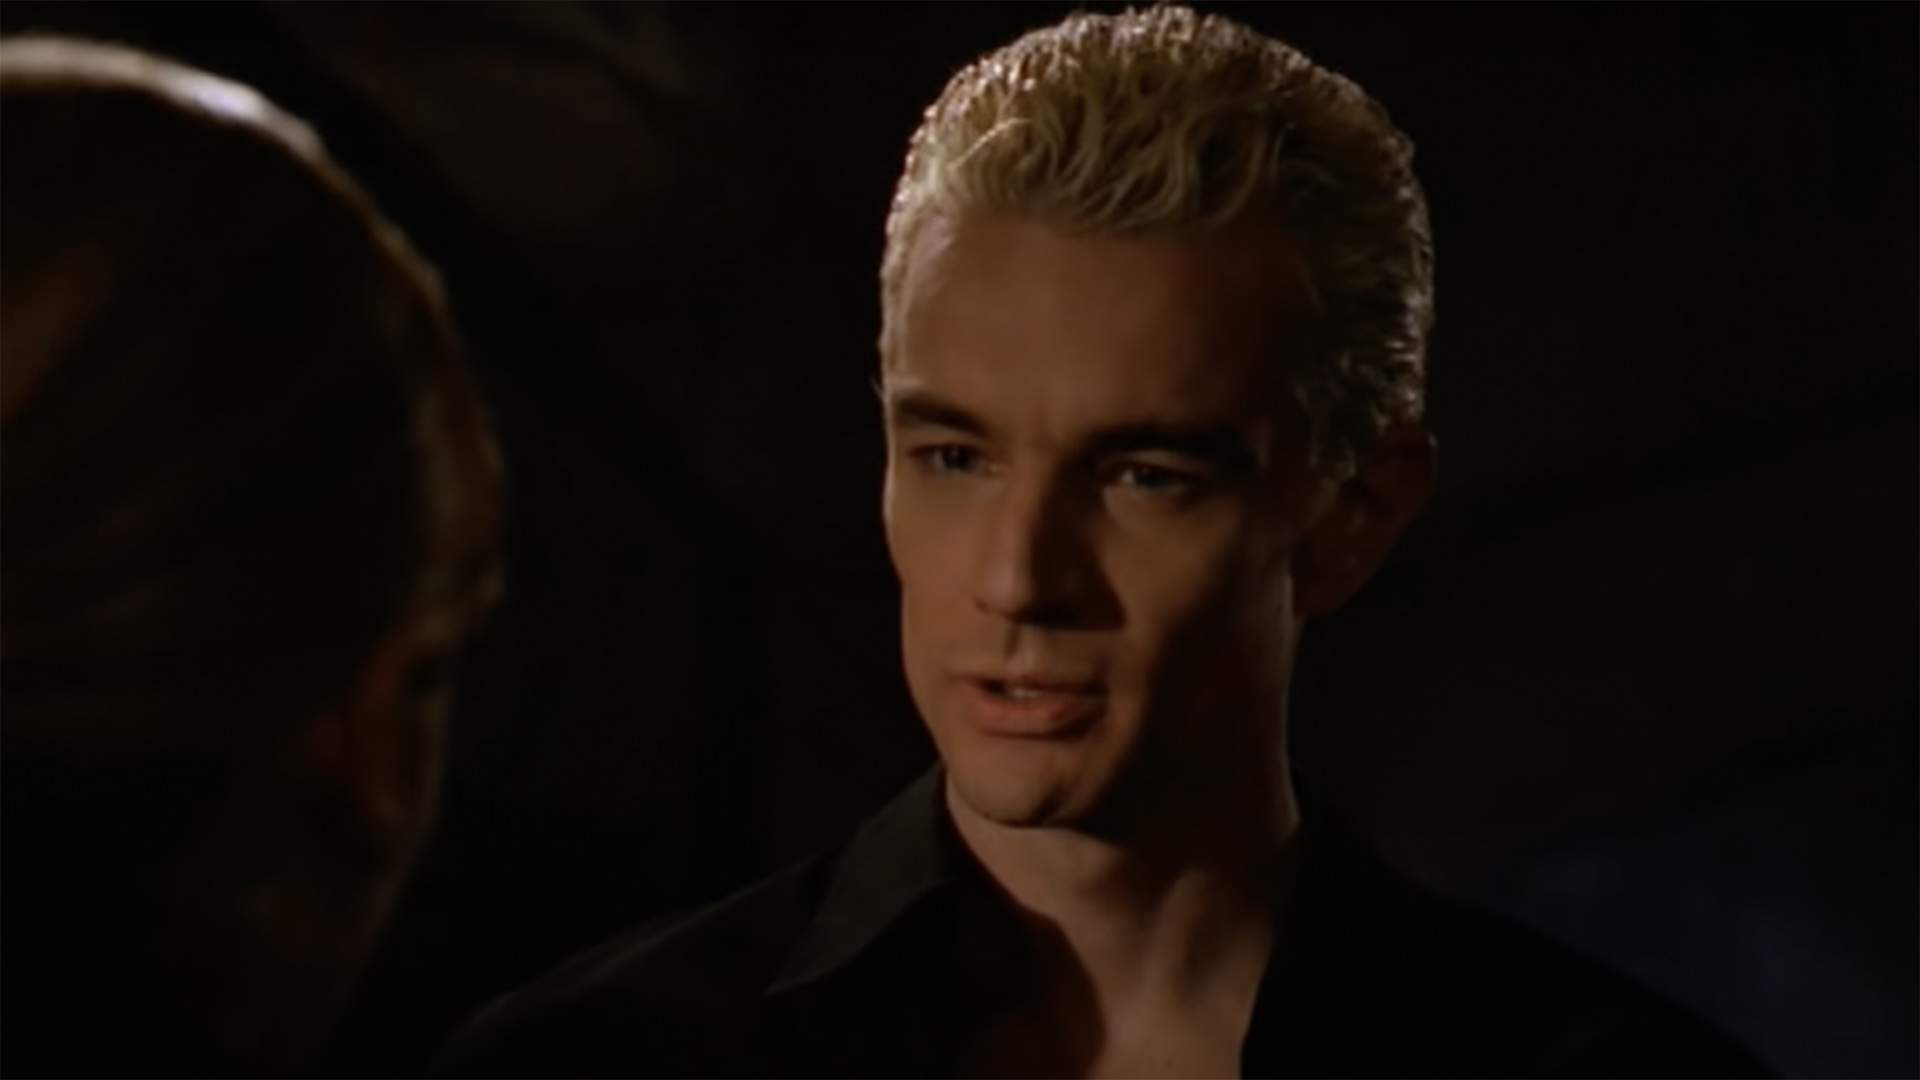 The Cast of 'Buffy the Vampire Slayer' Is Reuniting for a Brand-New Audible Spinoff About Spike